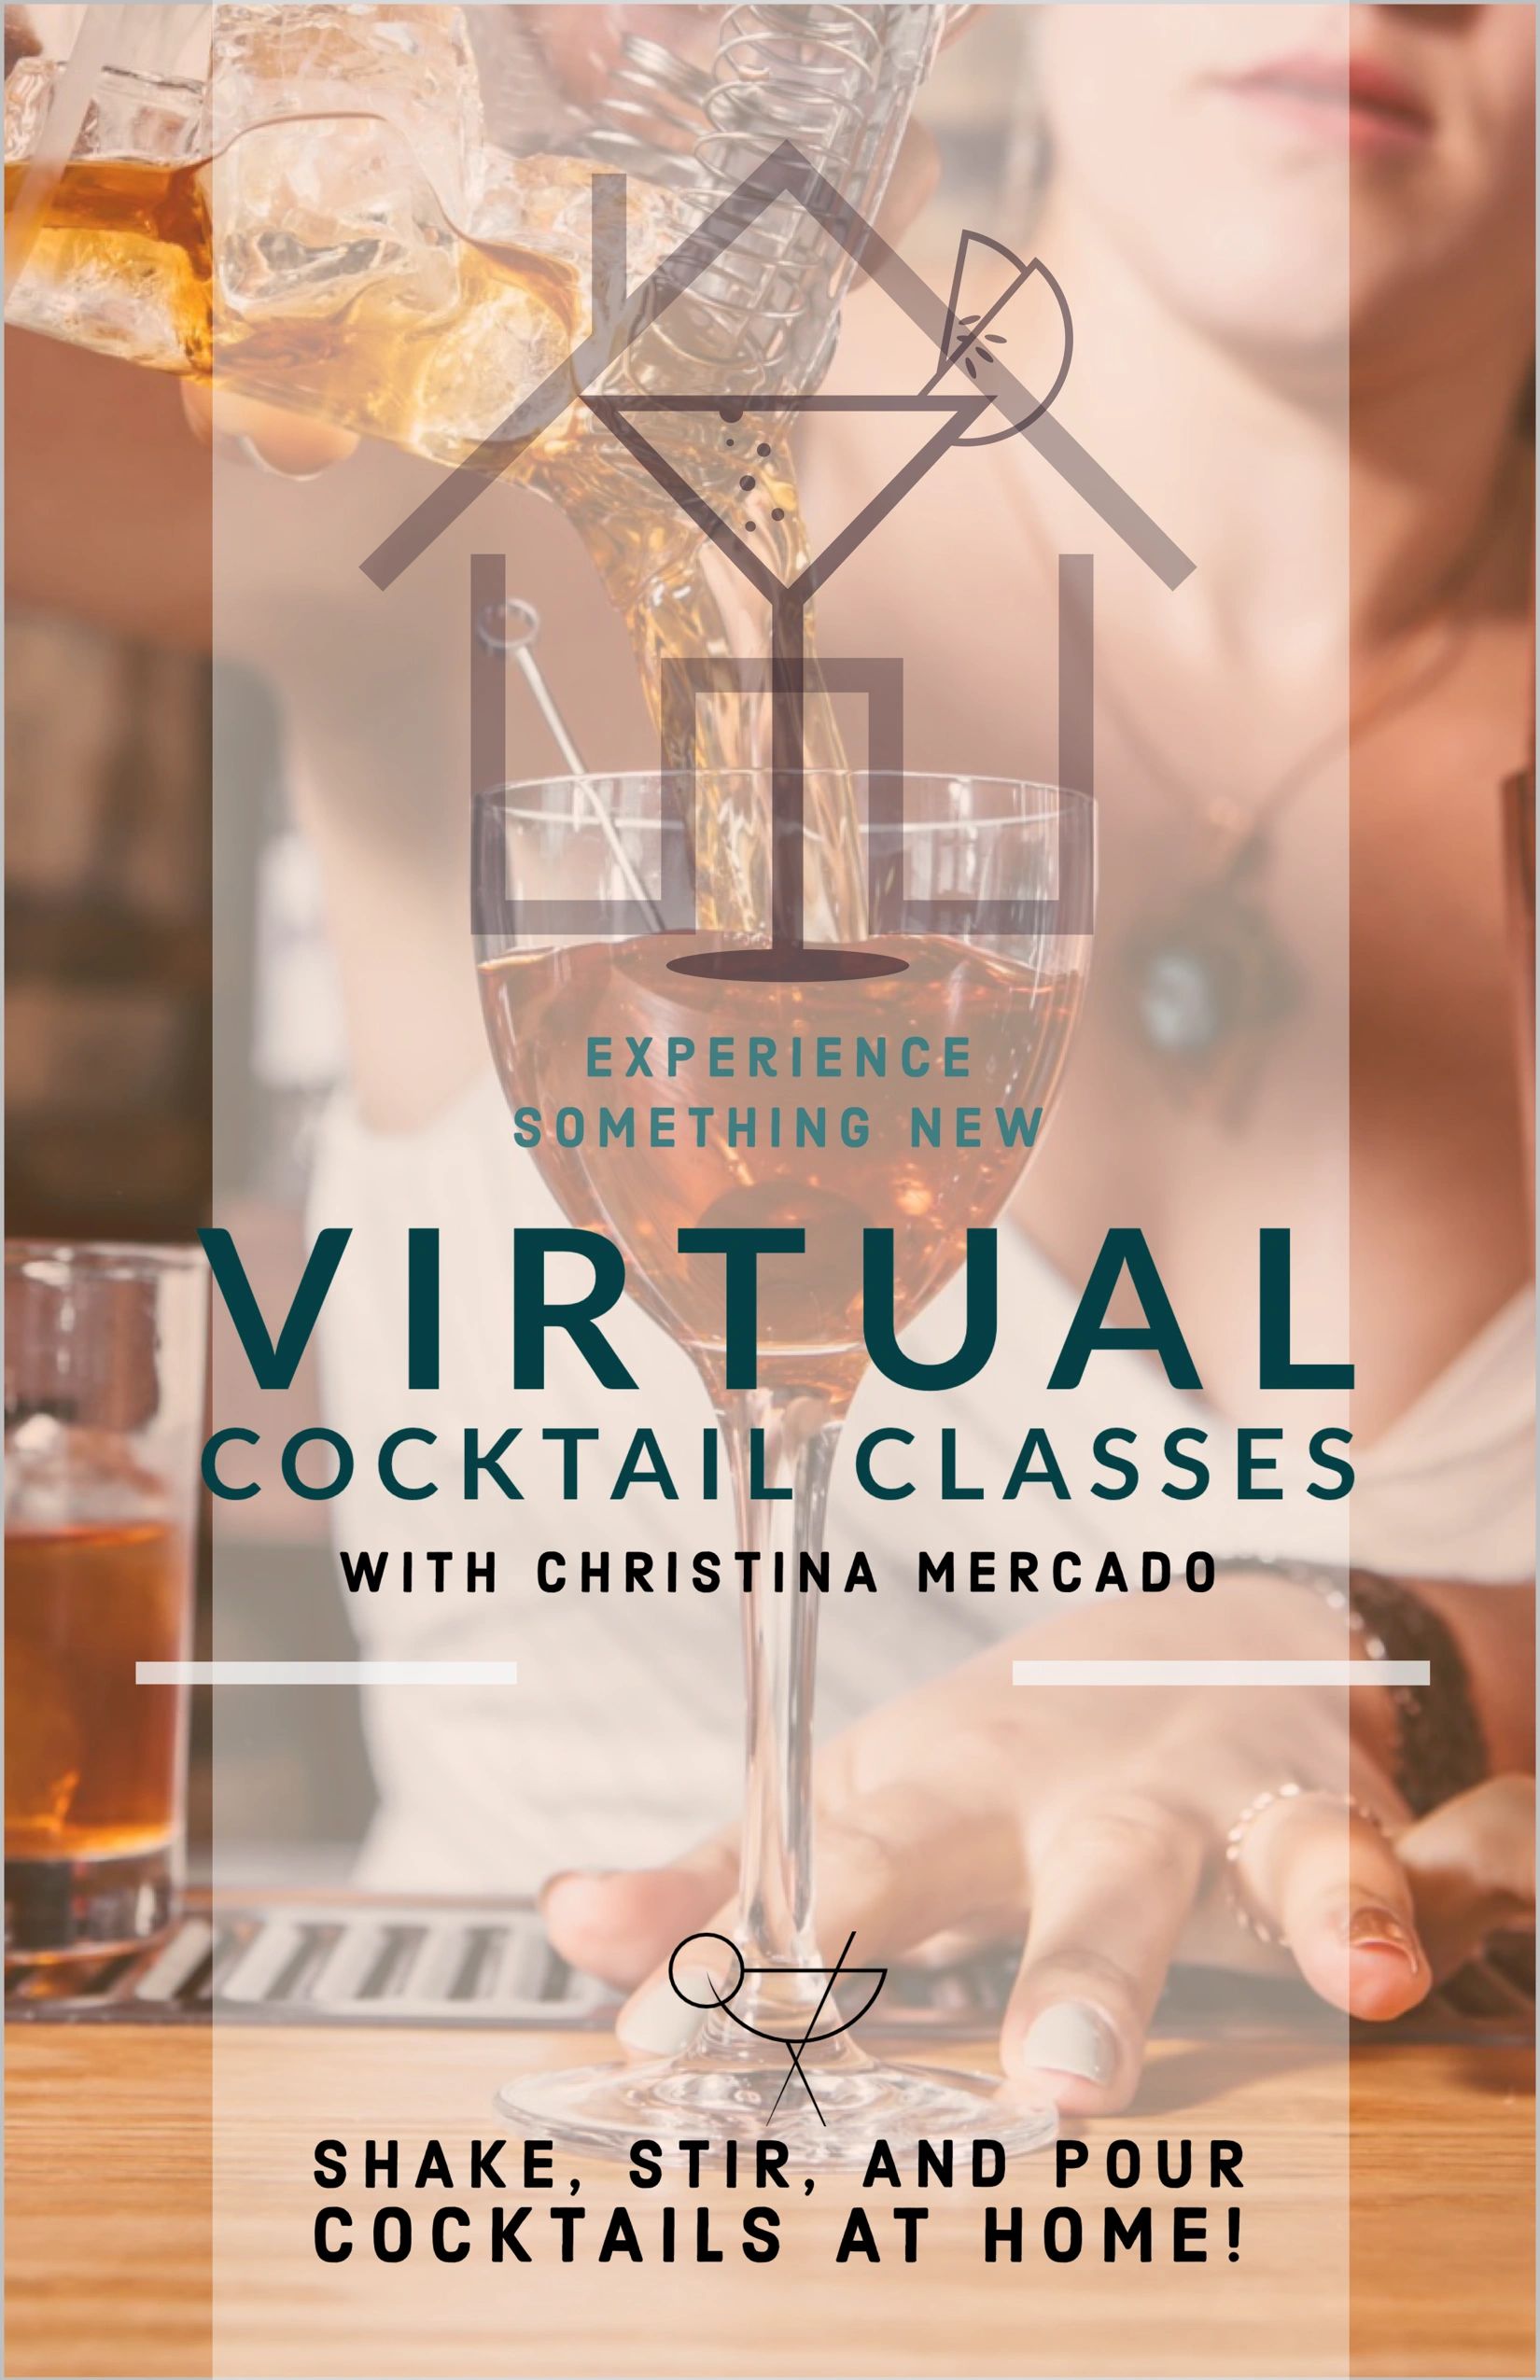 Virtual Cocktail Classes, Virtual Pastry Classes, Corporate Team Building Classes, Team Building Act